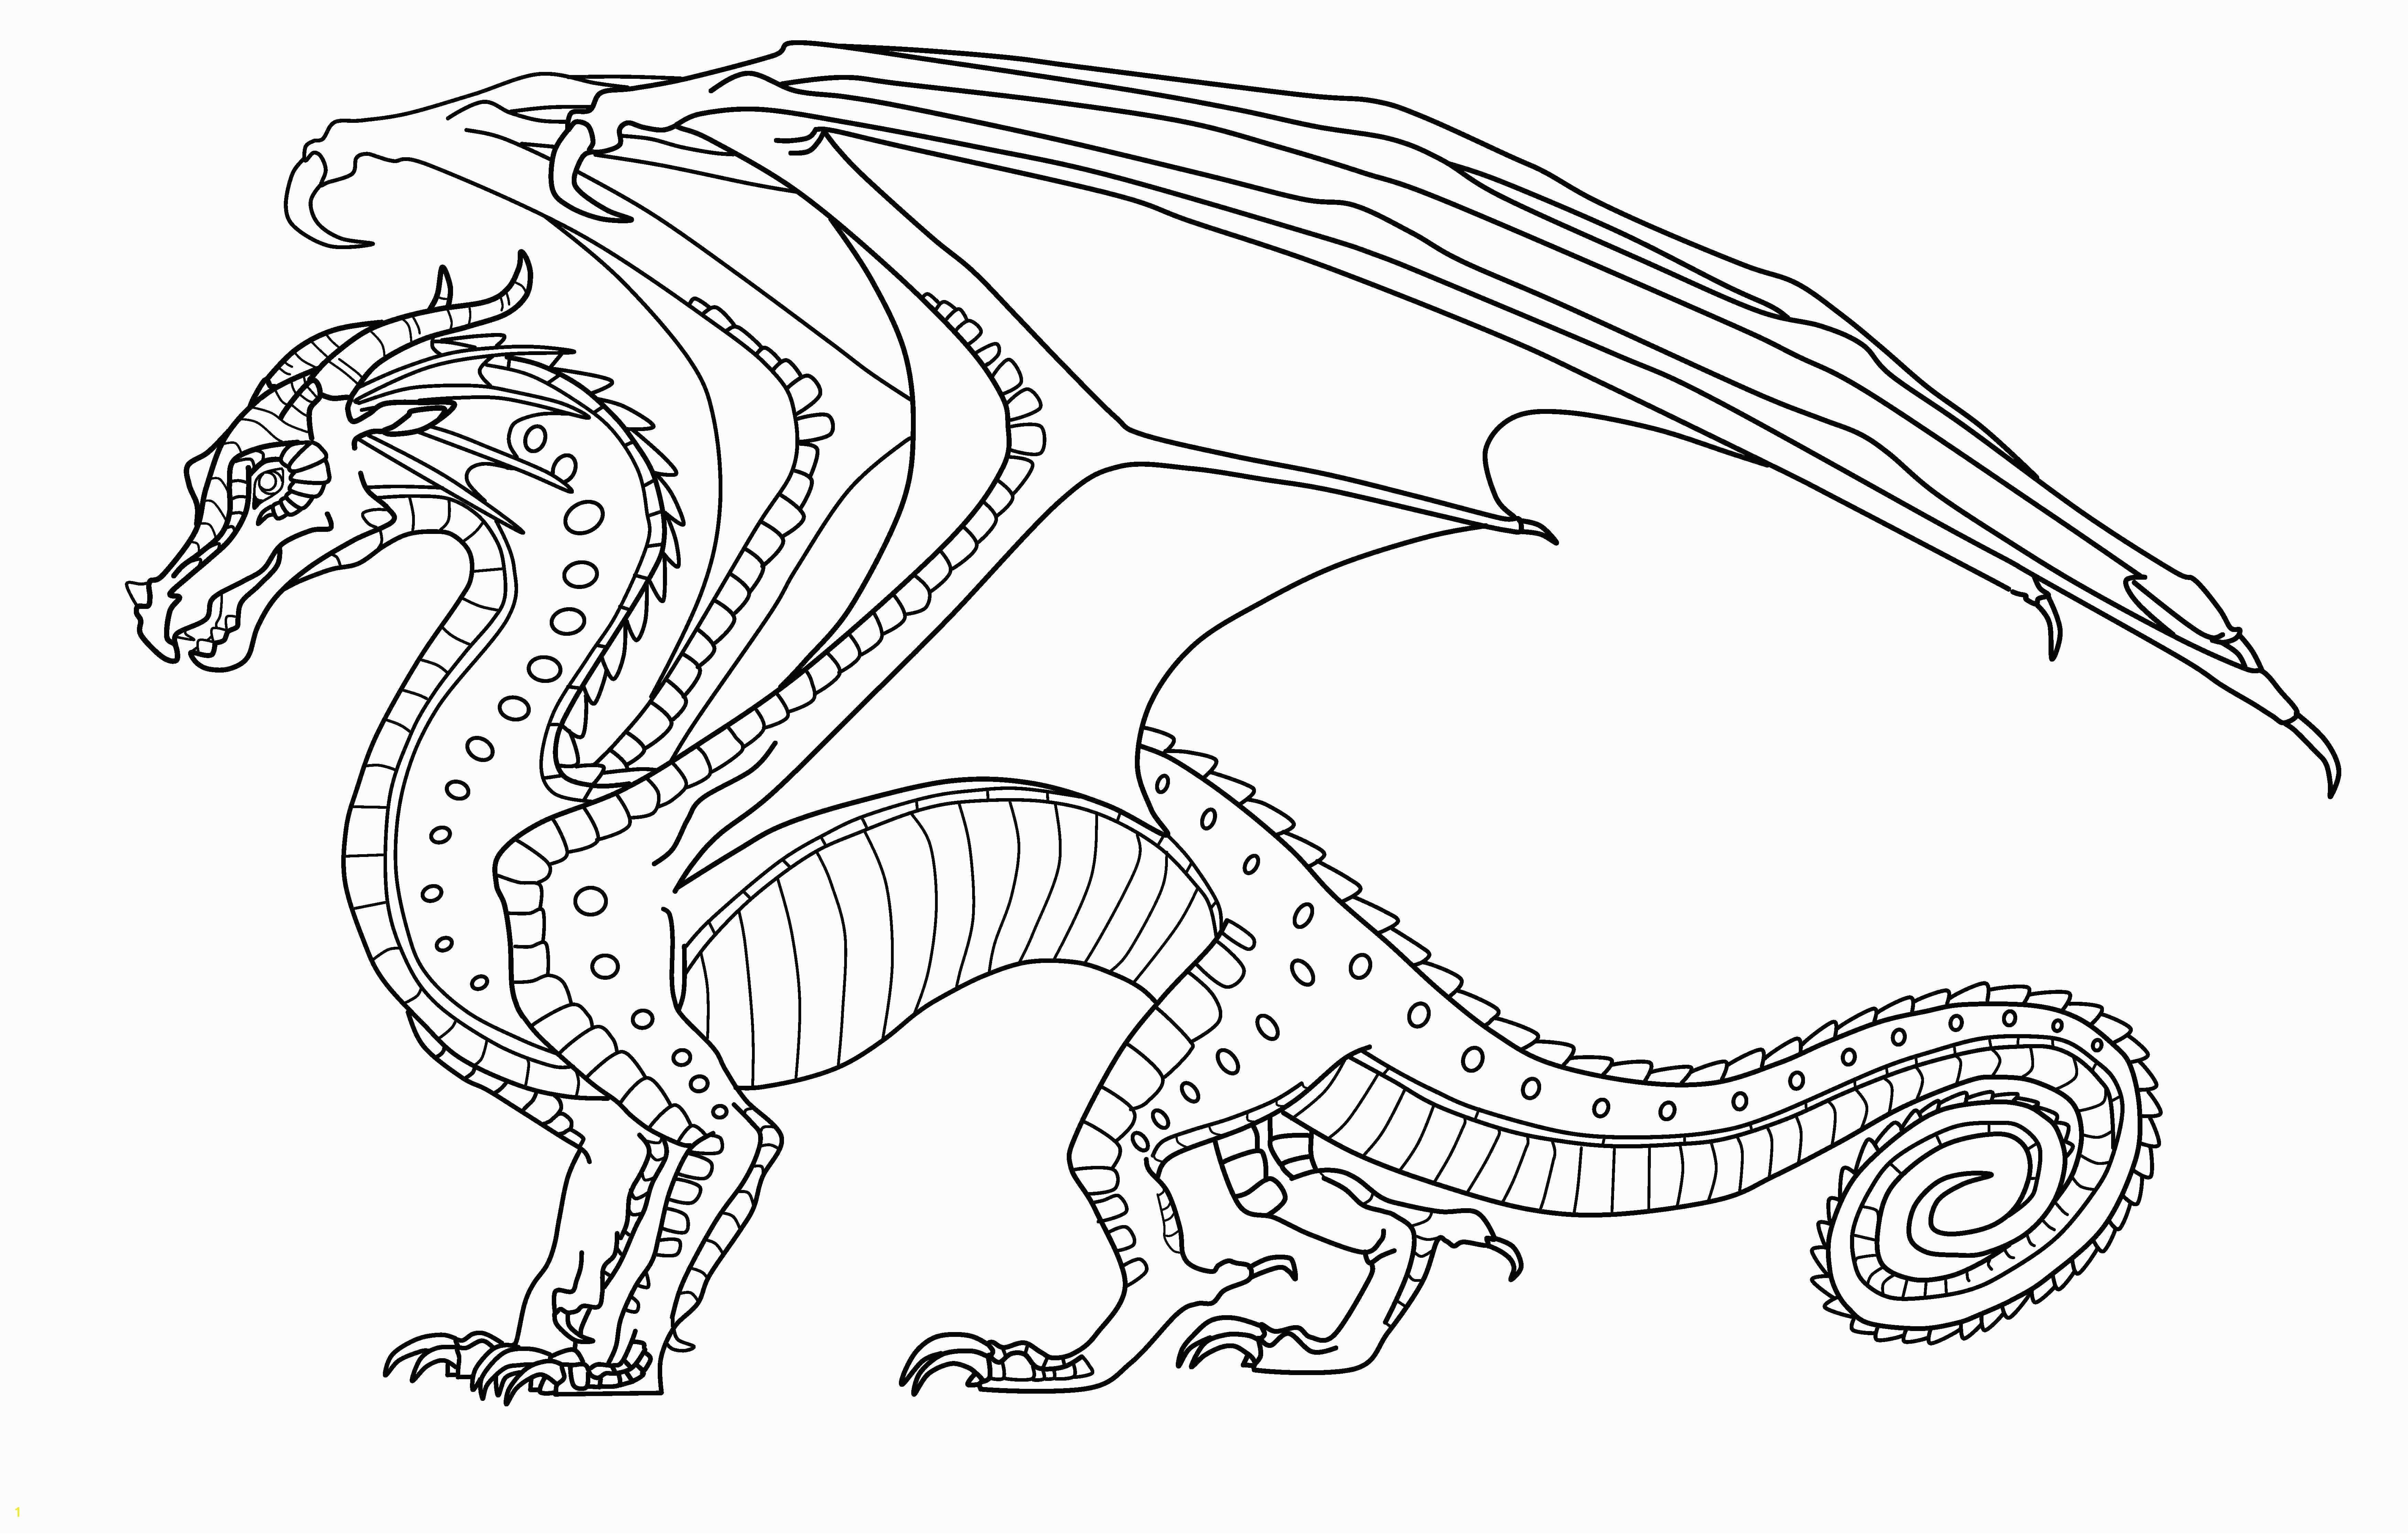 Outstanding Wings Fire Coloring Page Free To Use Rainwing Lineart By Extraordinary Pages